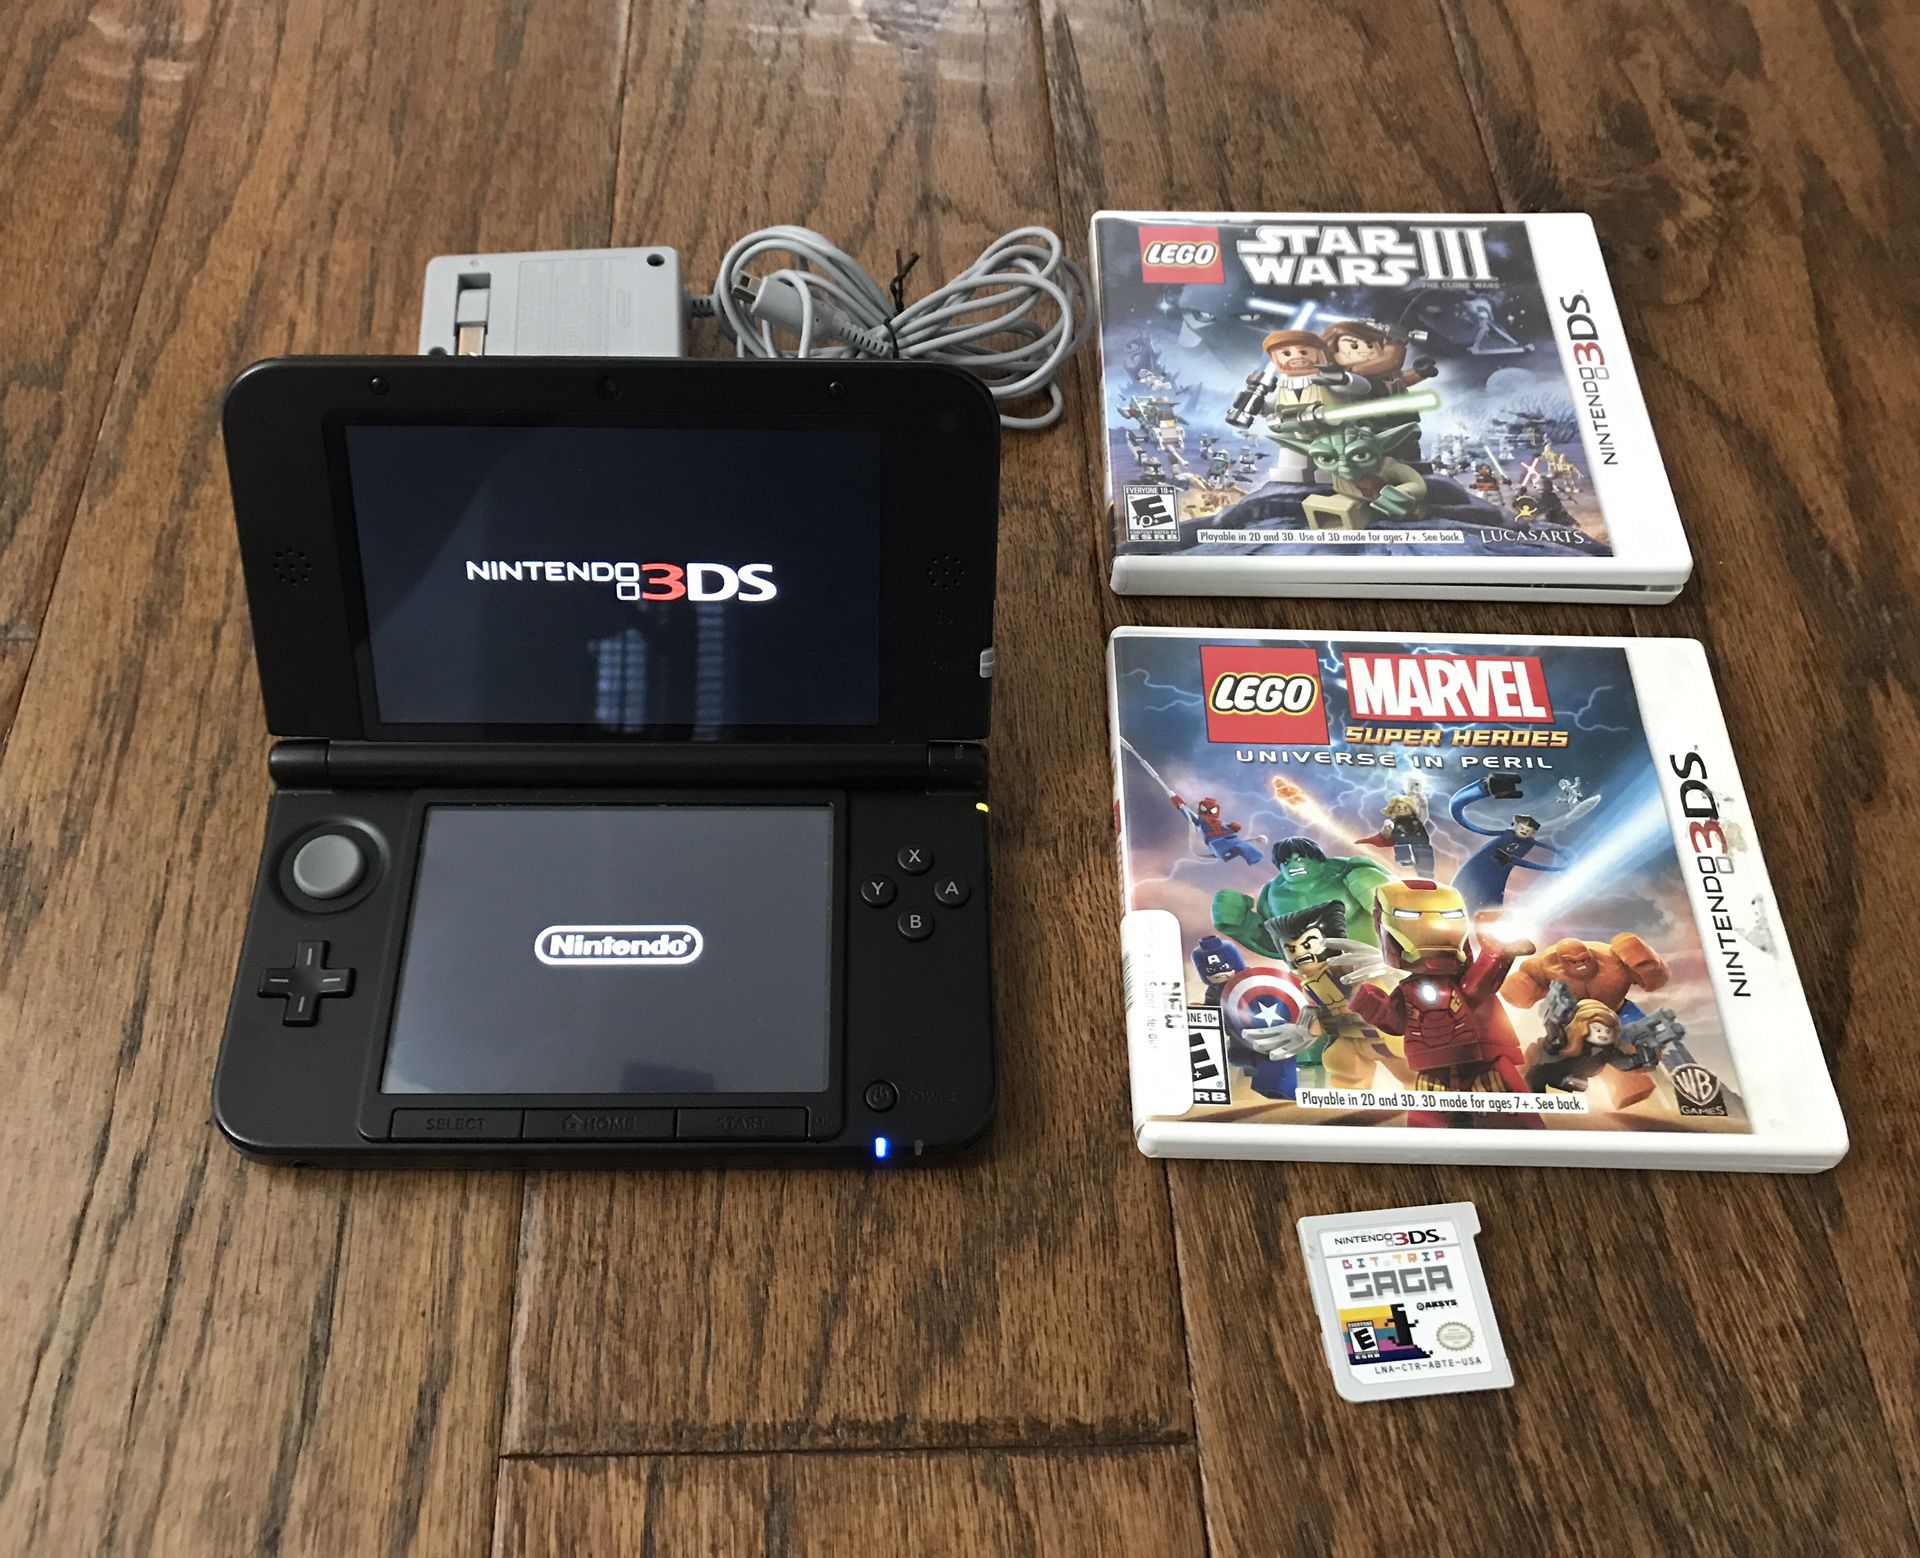 Nintendo 3DS XL with 3 games